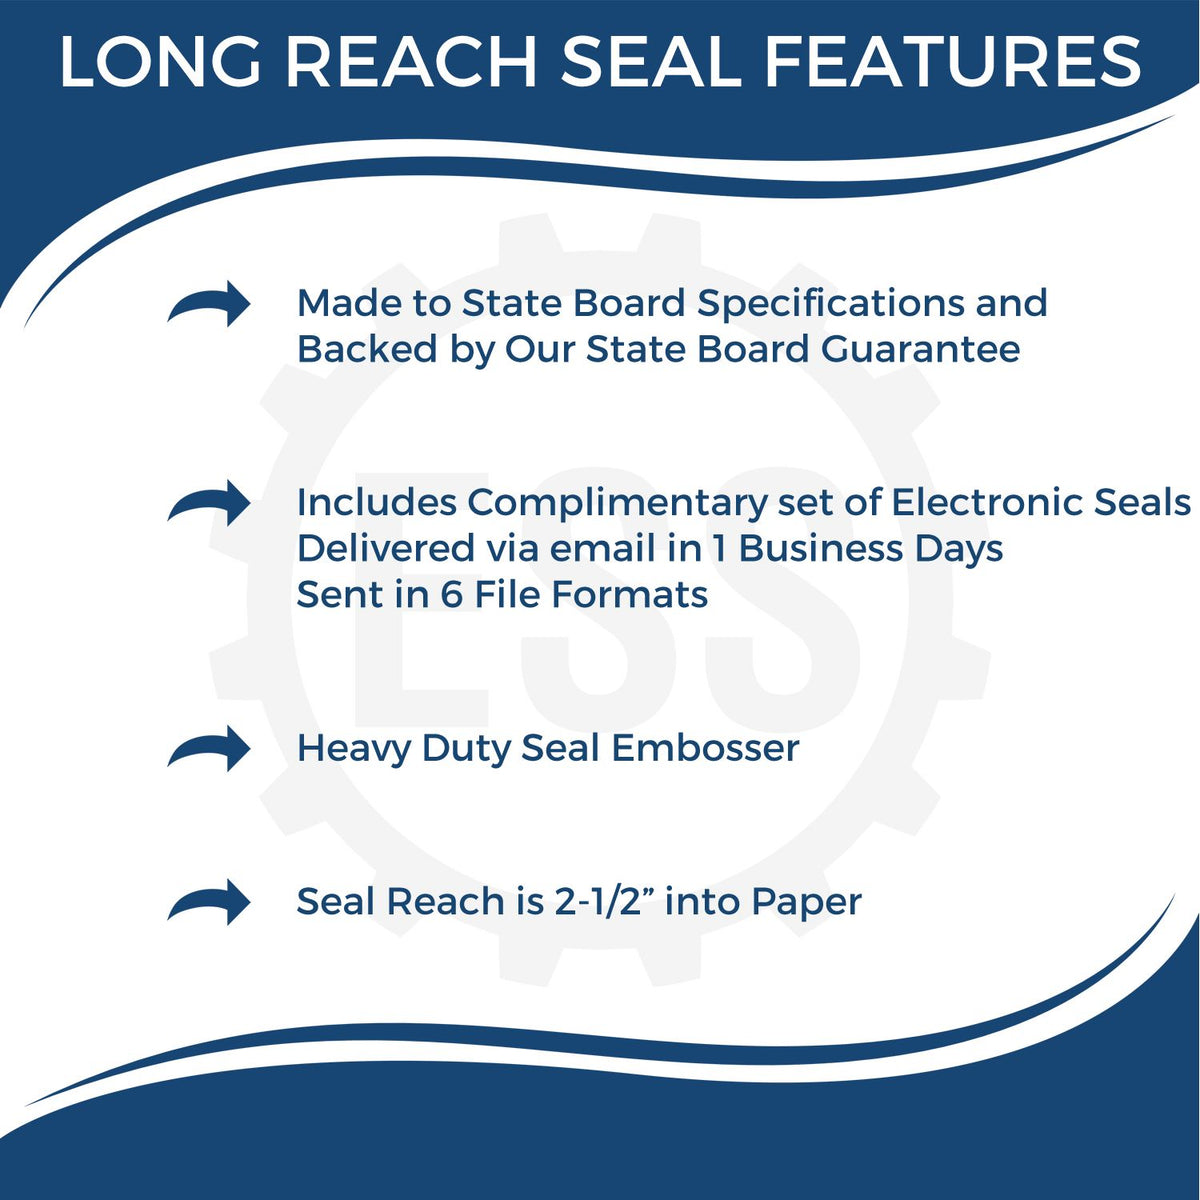 A picture of an infographic highlighting the selling points for the Long Reach Pennsylvania Geology Seal